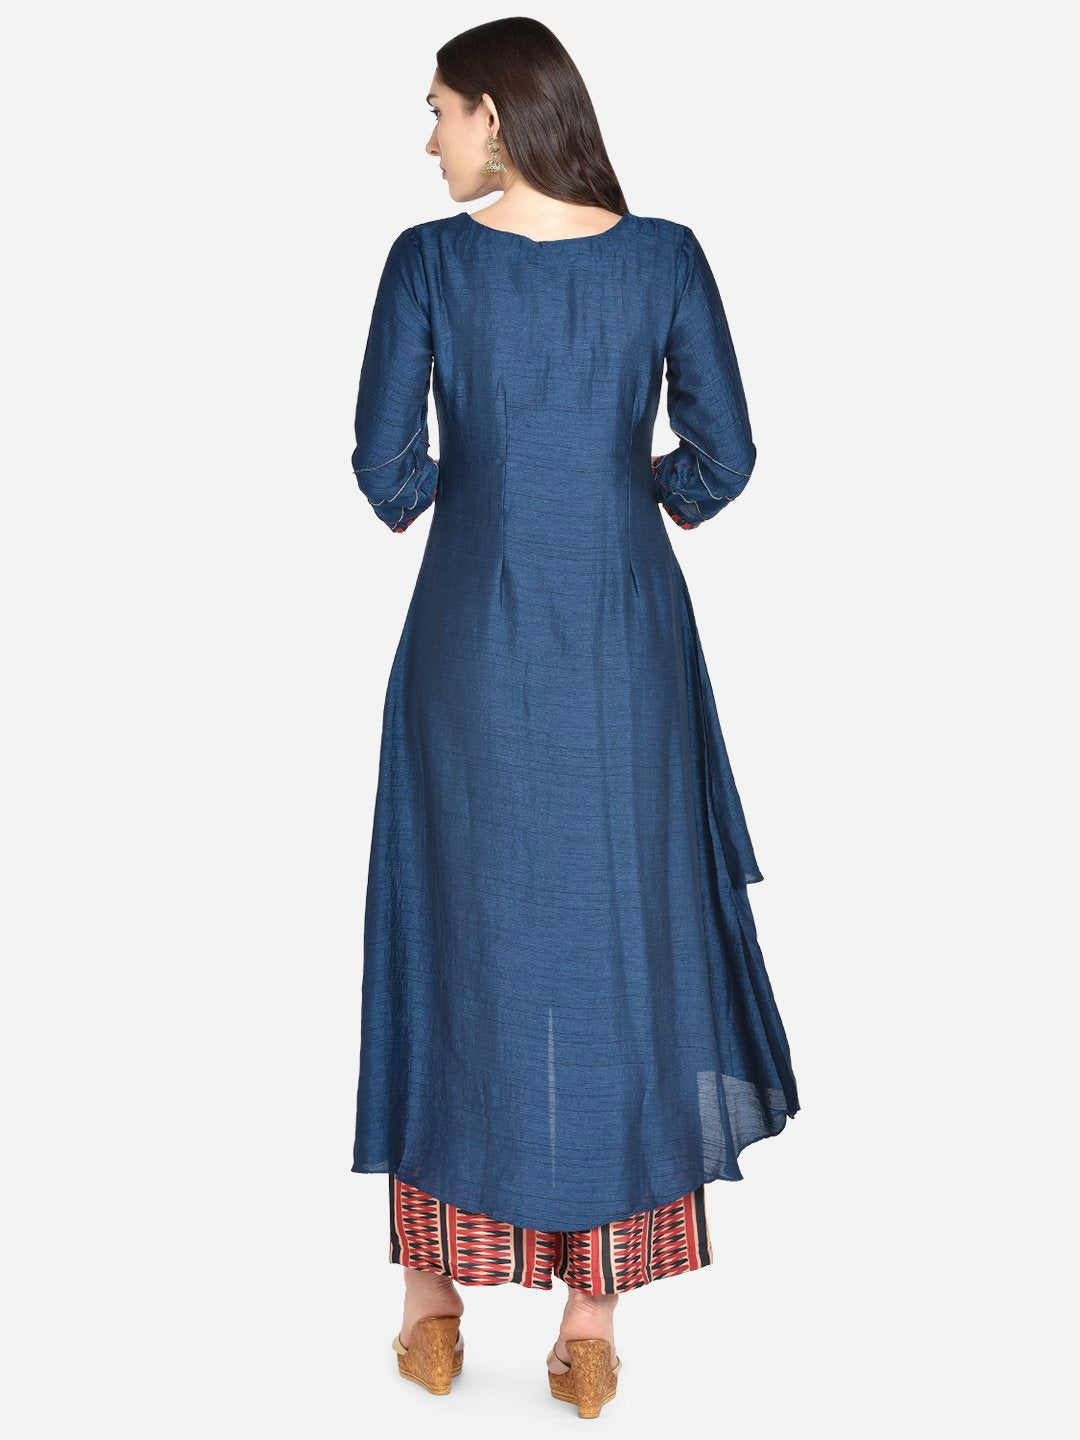 It Way Of Life -  Blue Solid Woven Kurti